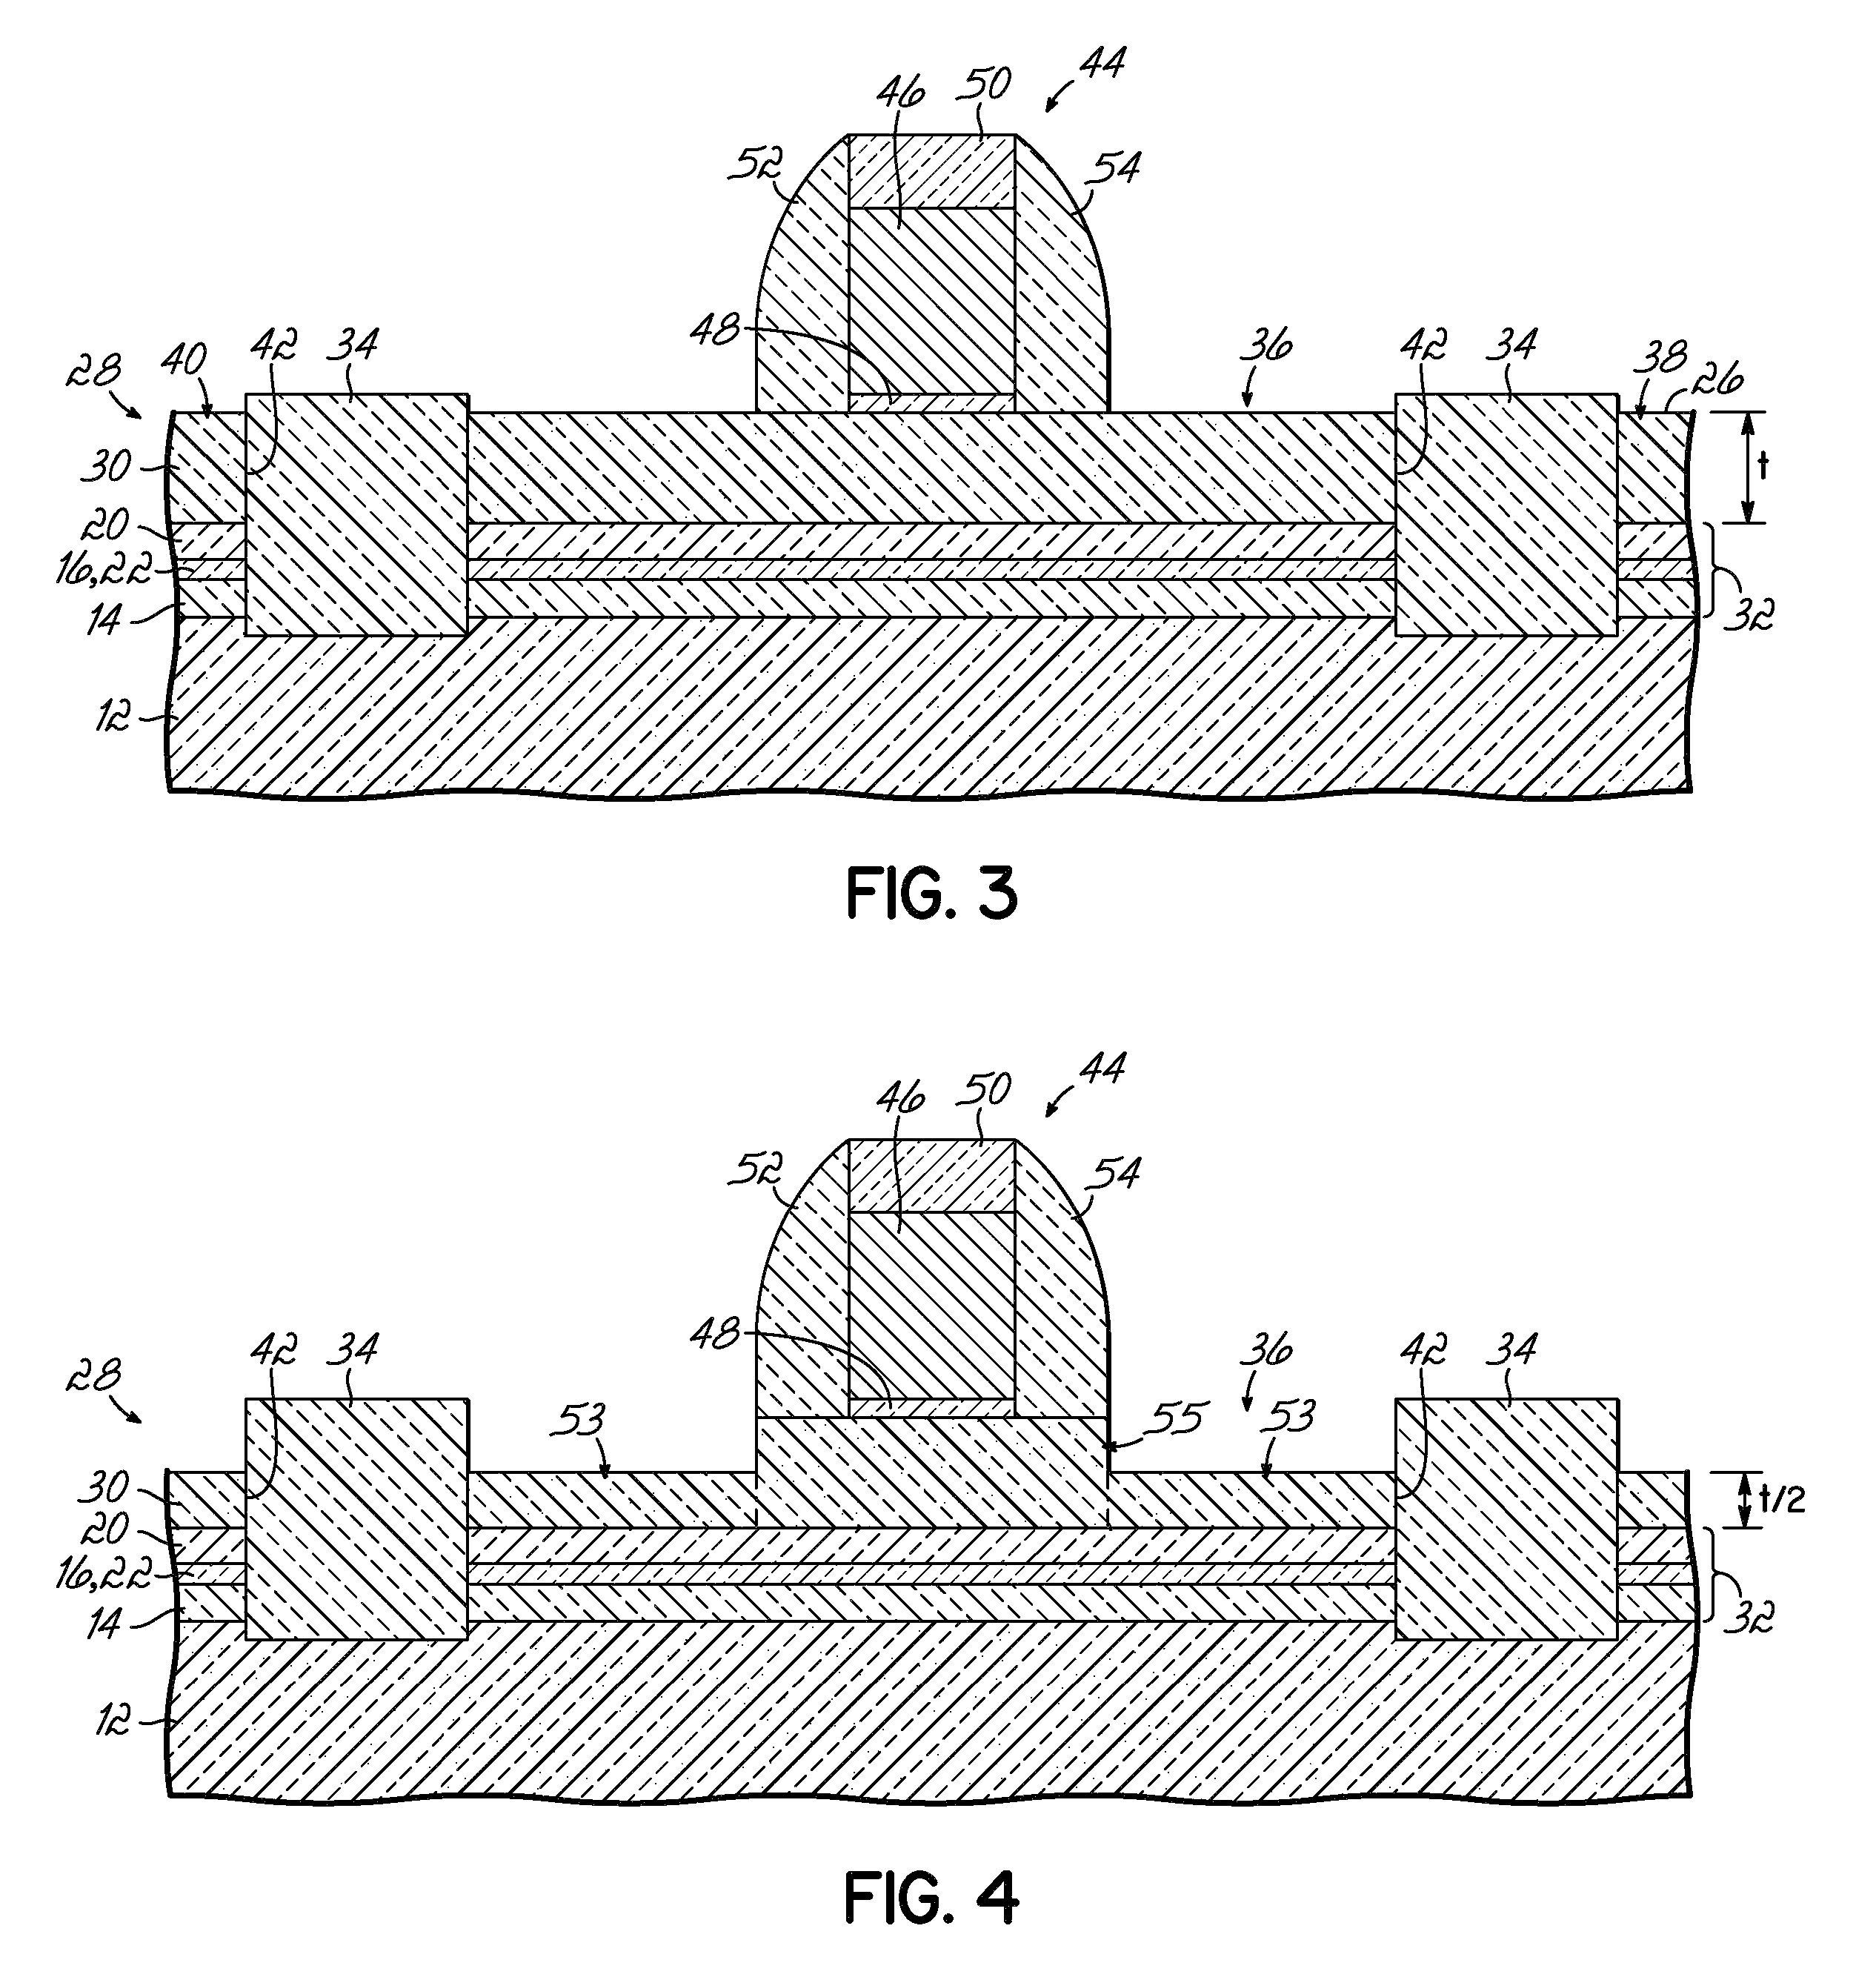 Structures incorporating semiconductor device structures with reduced junction capacitance and drain induced barrier lowering